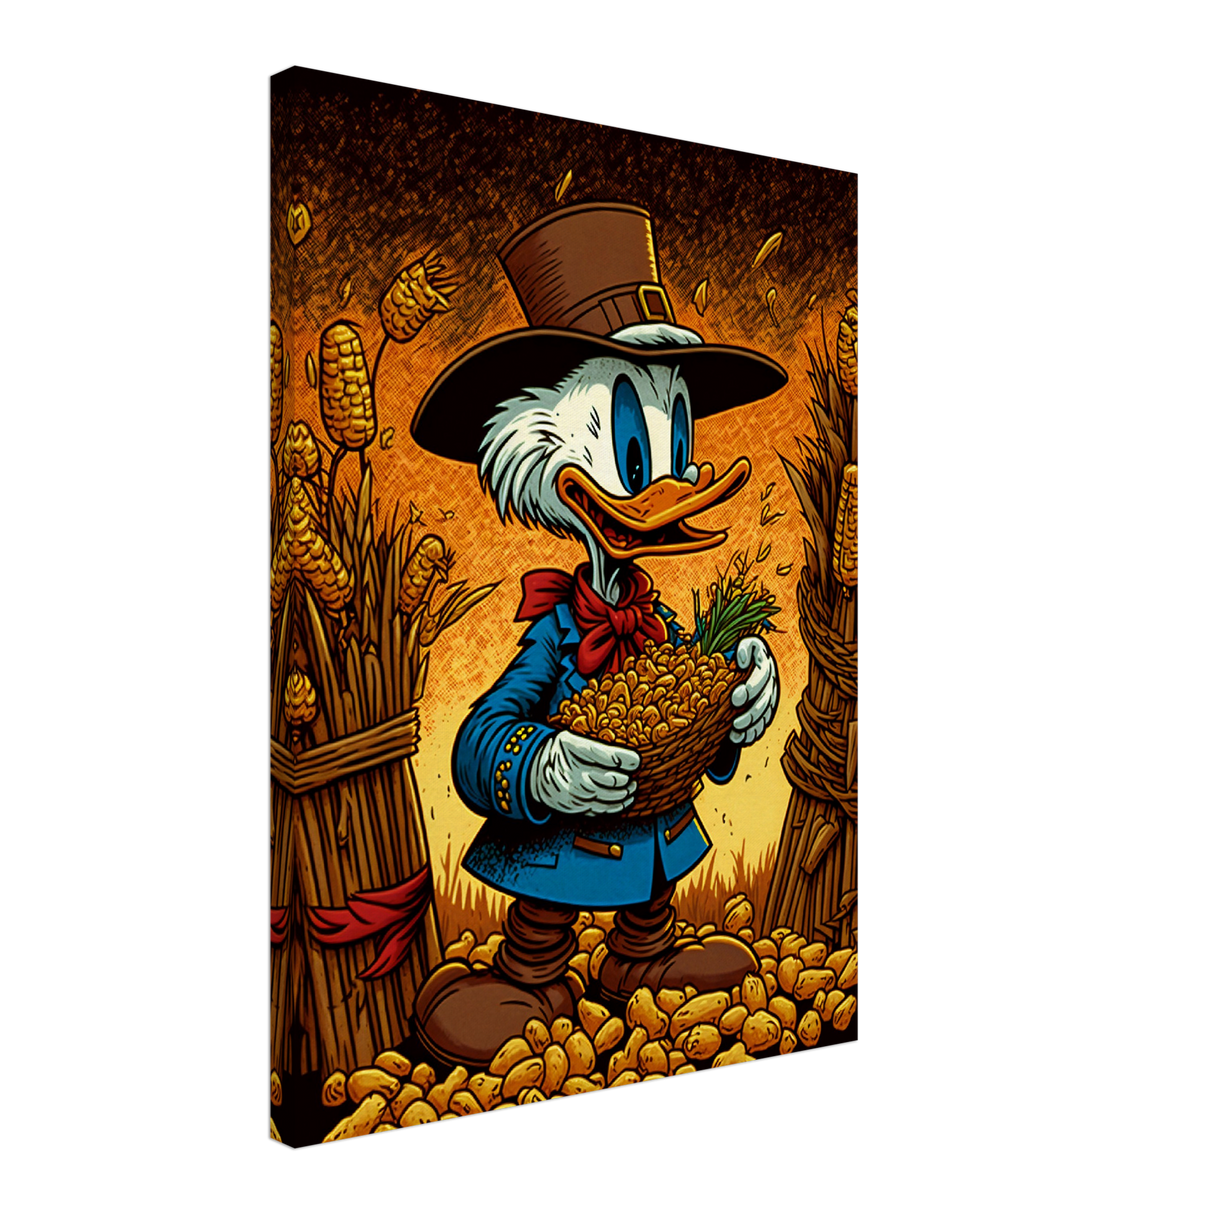 Scrooge's Fortune Canvas Print - WallLumi Canvases